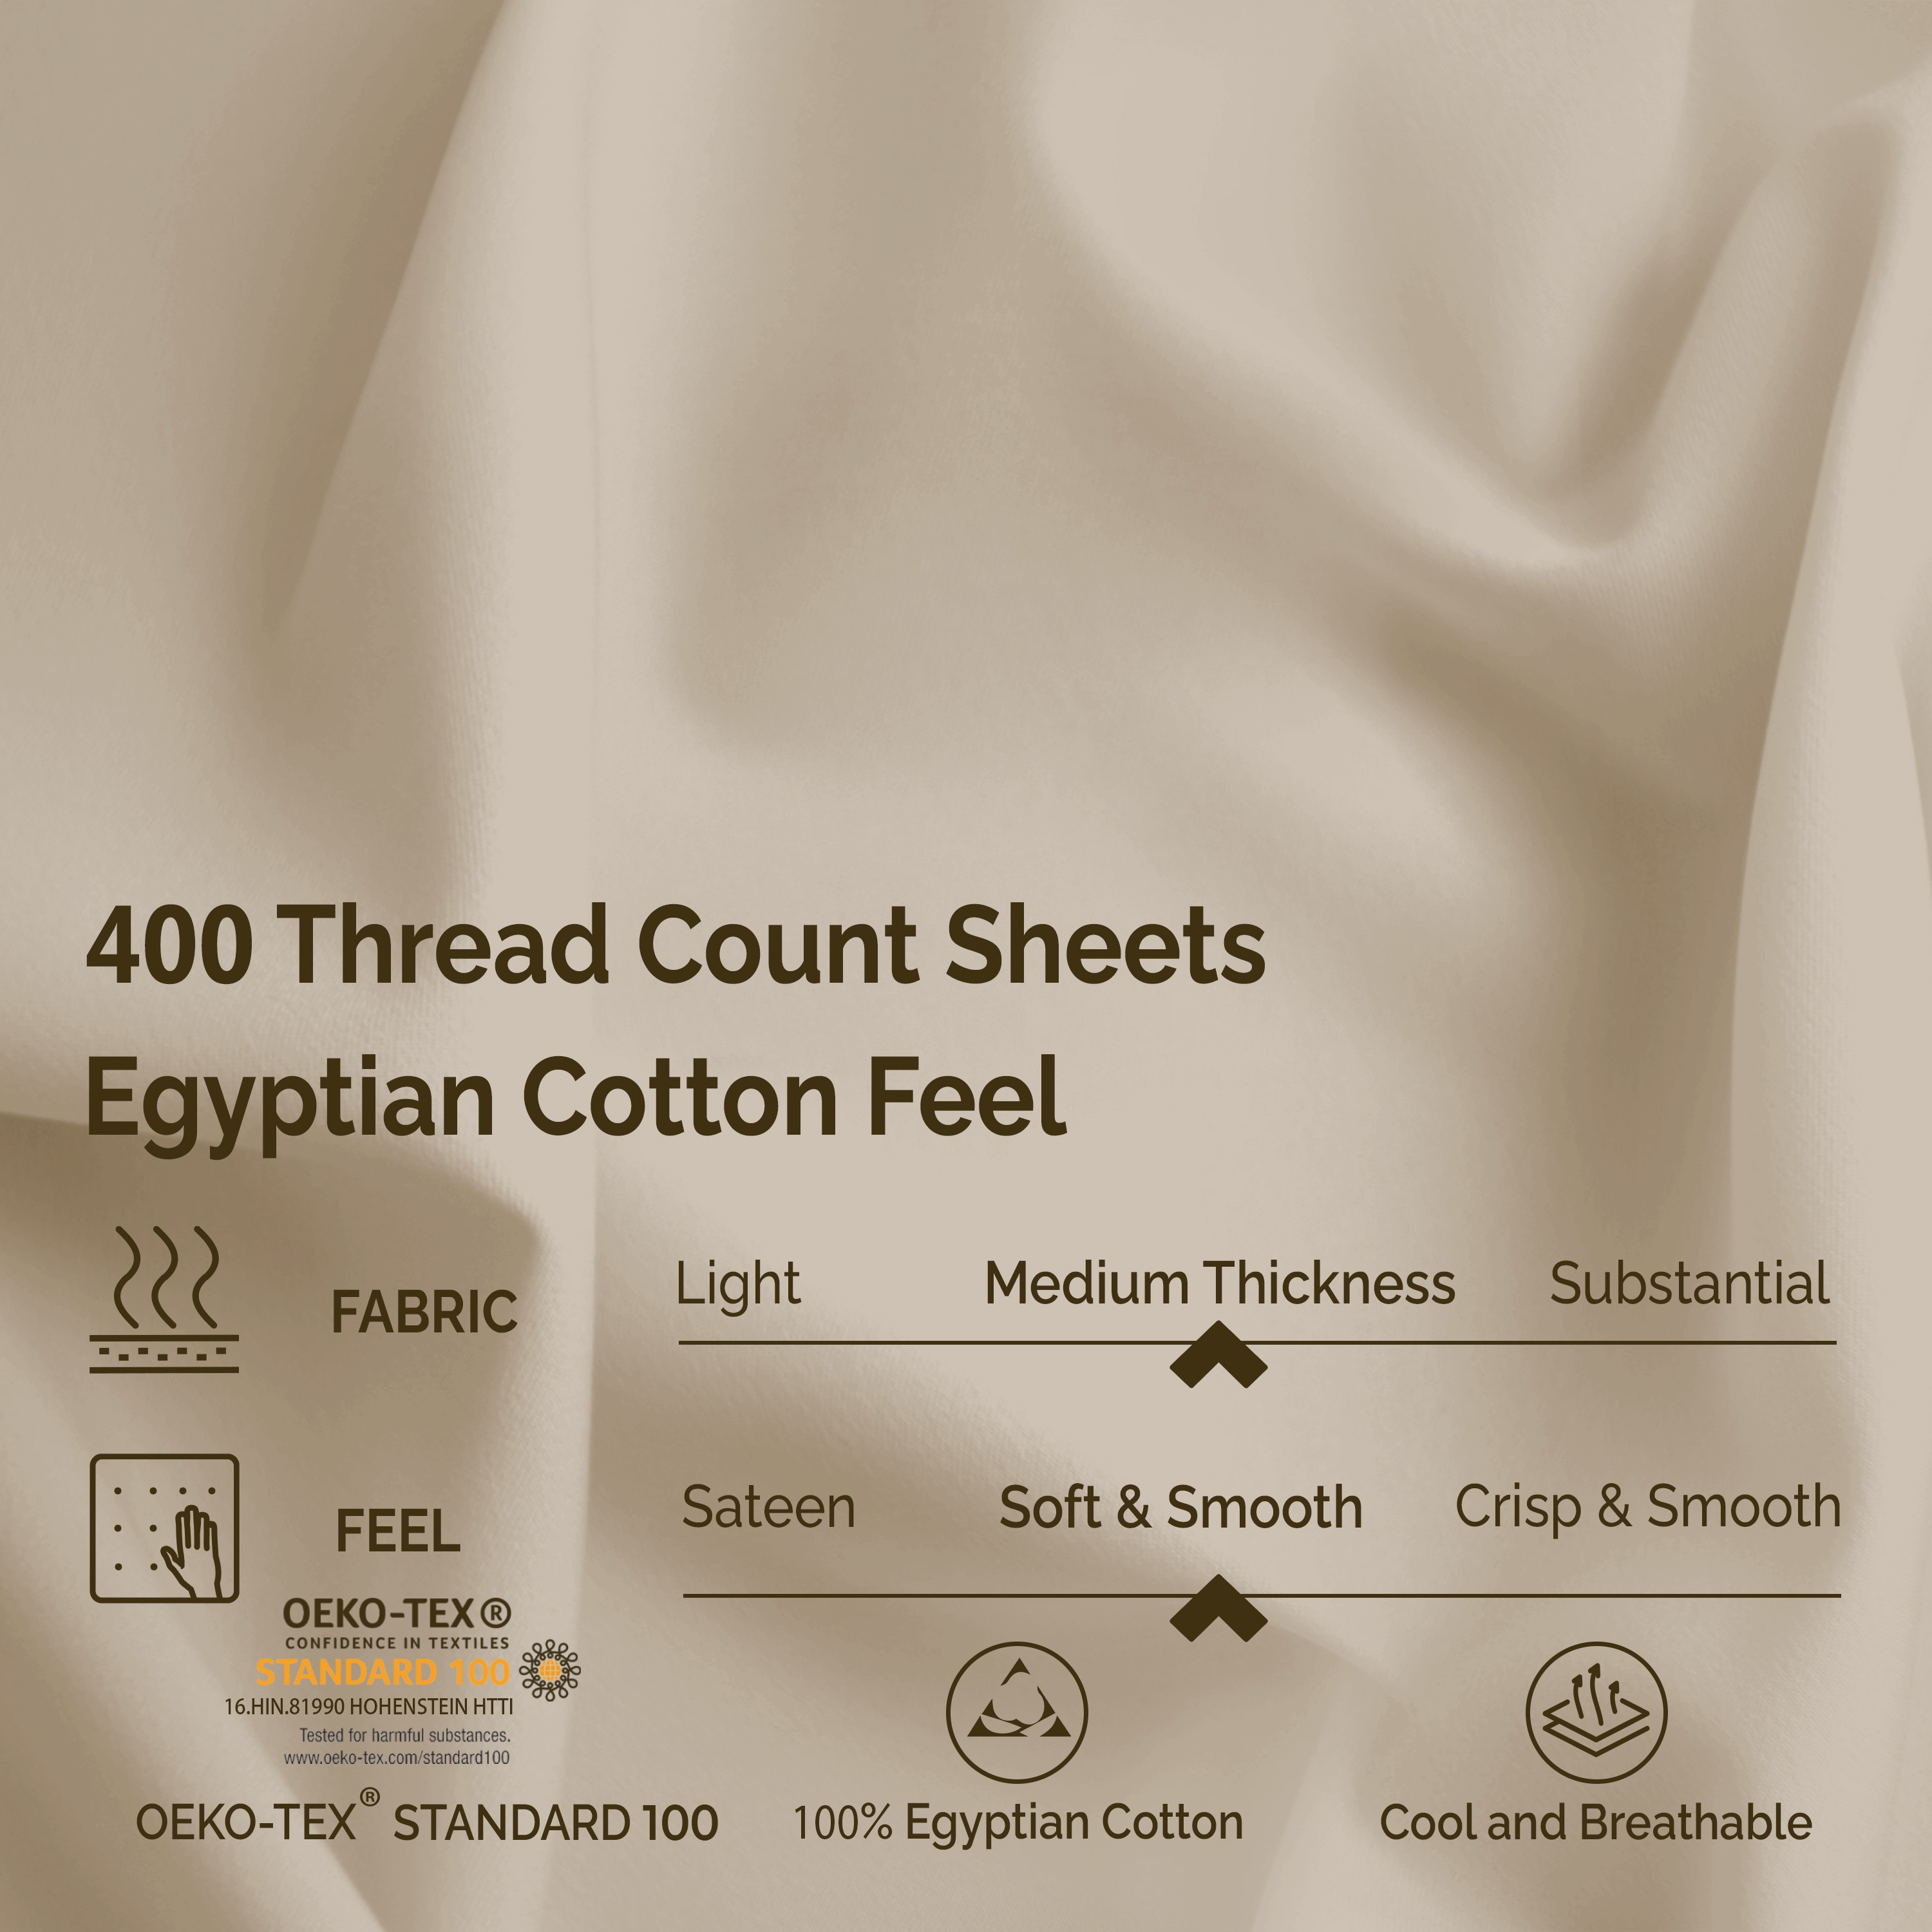 Superior Egyptian Cotton 1500 Thread Count Bed Sheet Set - On Sale - Bed  Bath & Beyond - 3355823